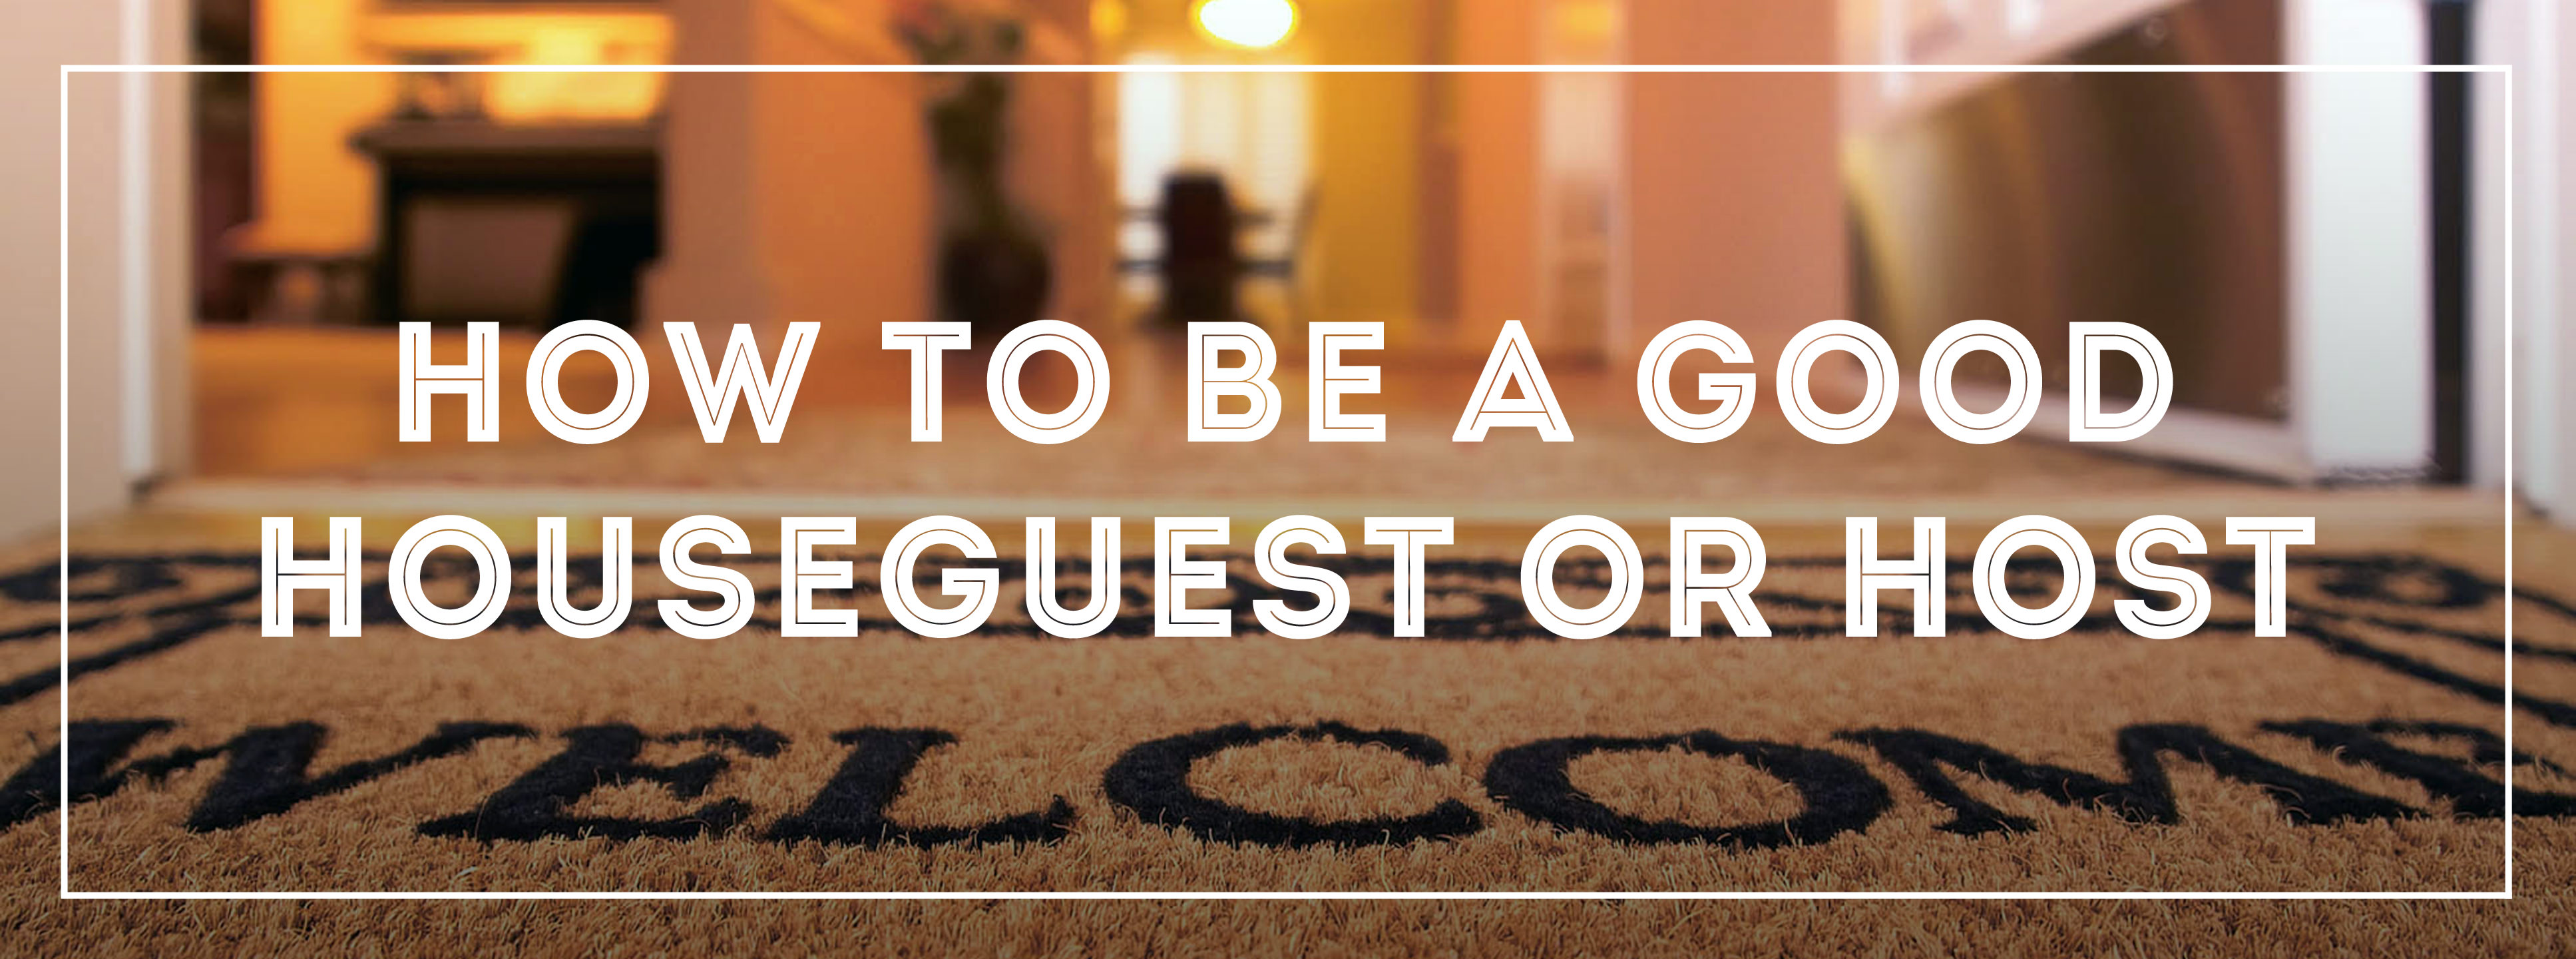 How to be a good houseguest or host